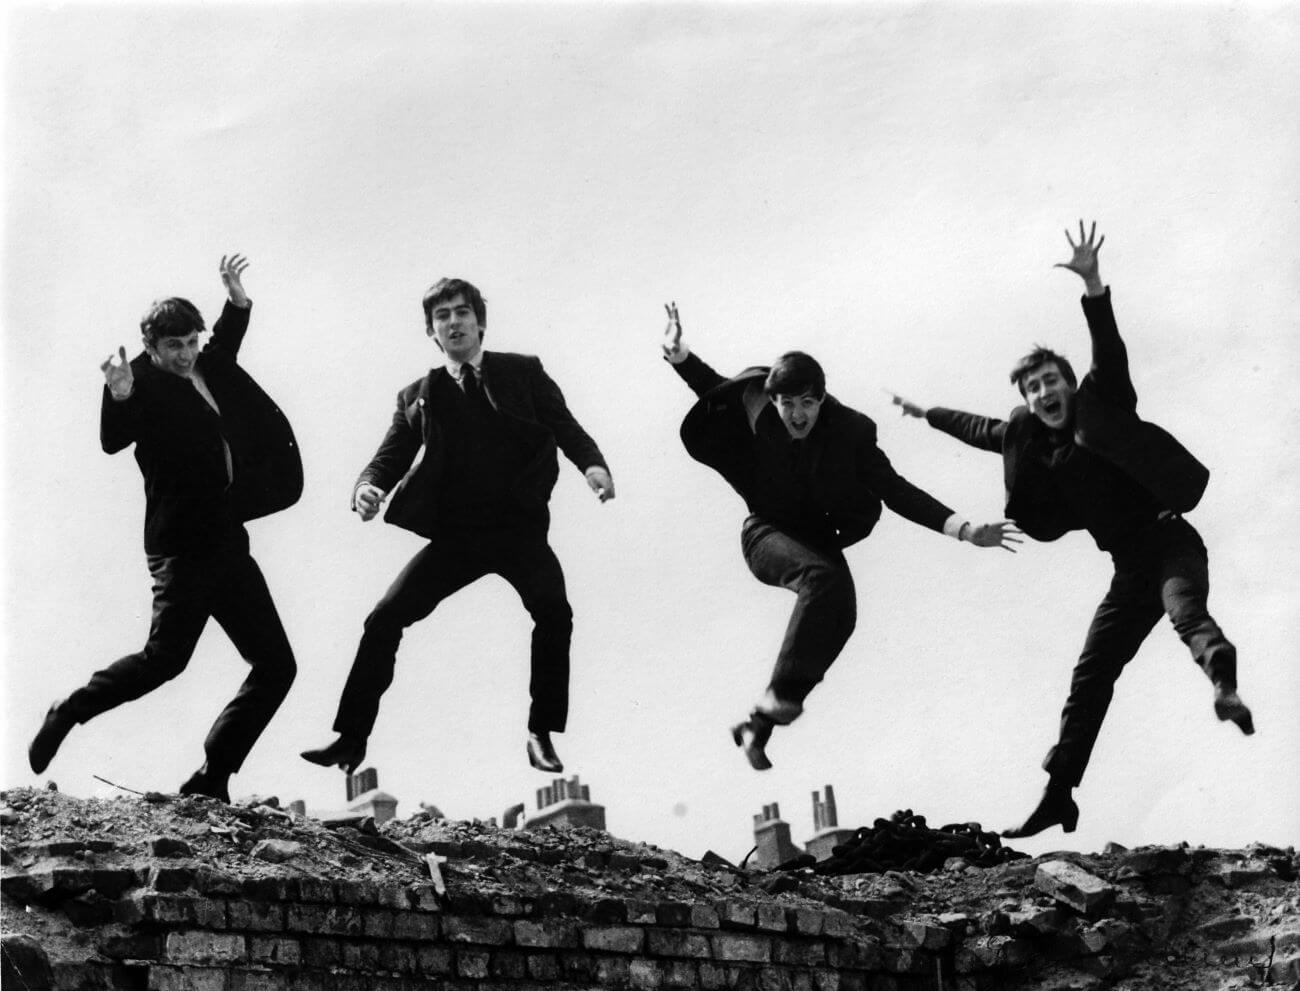 A black and white picture of The Beatles jumping off a brick wall.